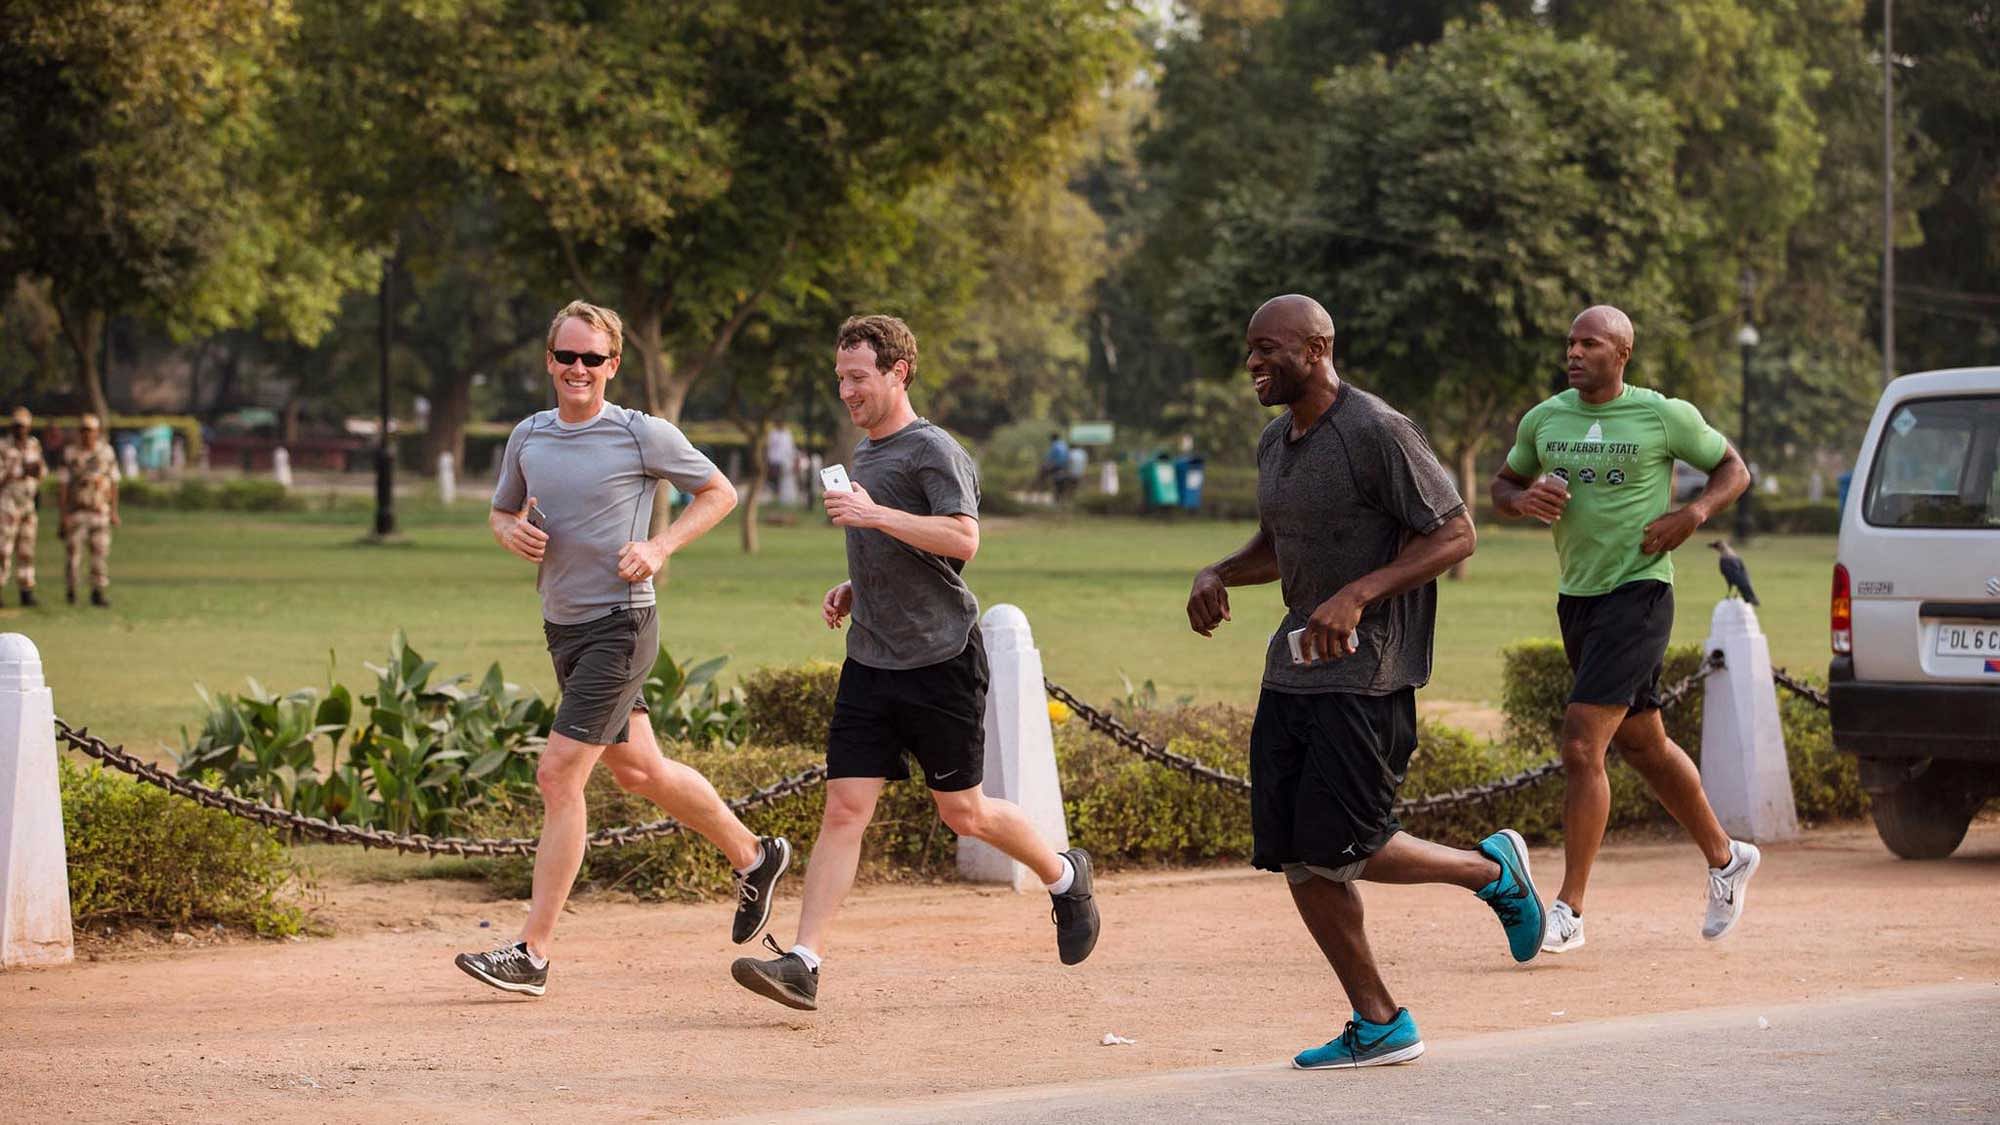 Mark Zuckerberg jogs at India Gate in a recent visit to India in 2015. (Photo Courtesy: <a href="https://www.facebook.com/photo.php?fbid=10102579344275191&amp;set=pb.4.-2207520000.1453798472.&amp;type=3&amp;theater">Facebook</a>)